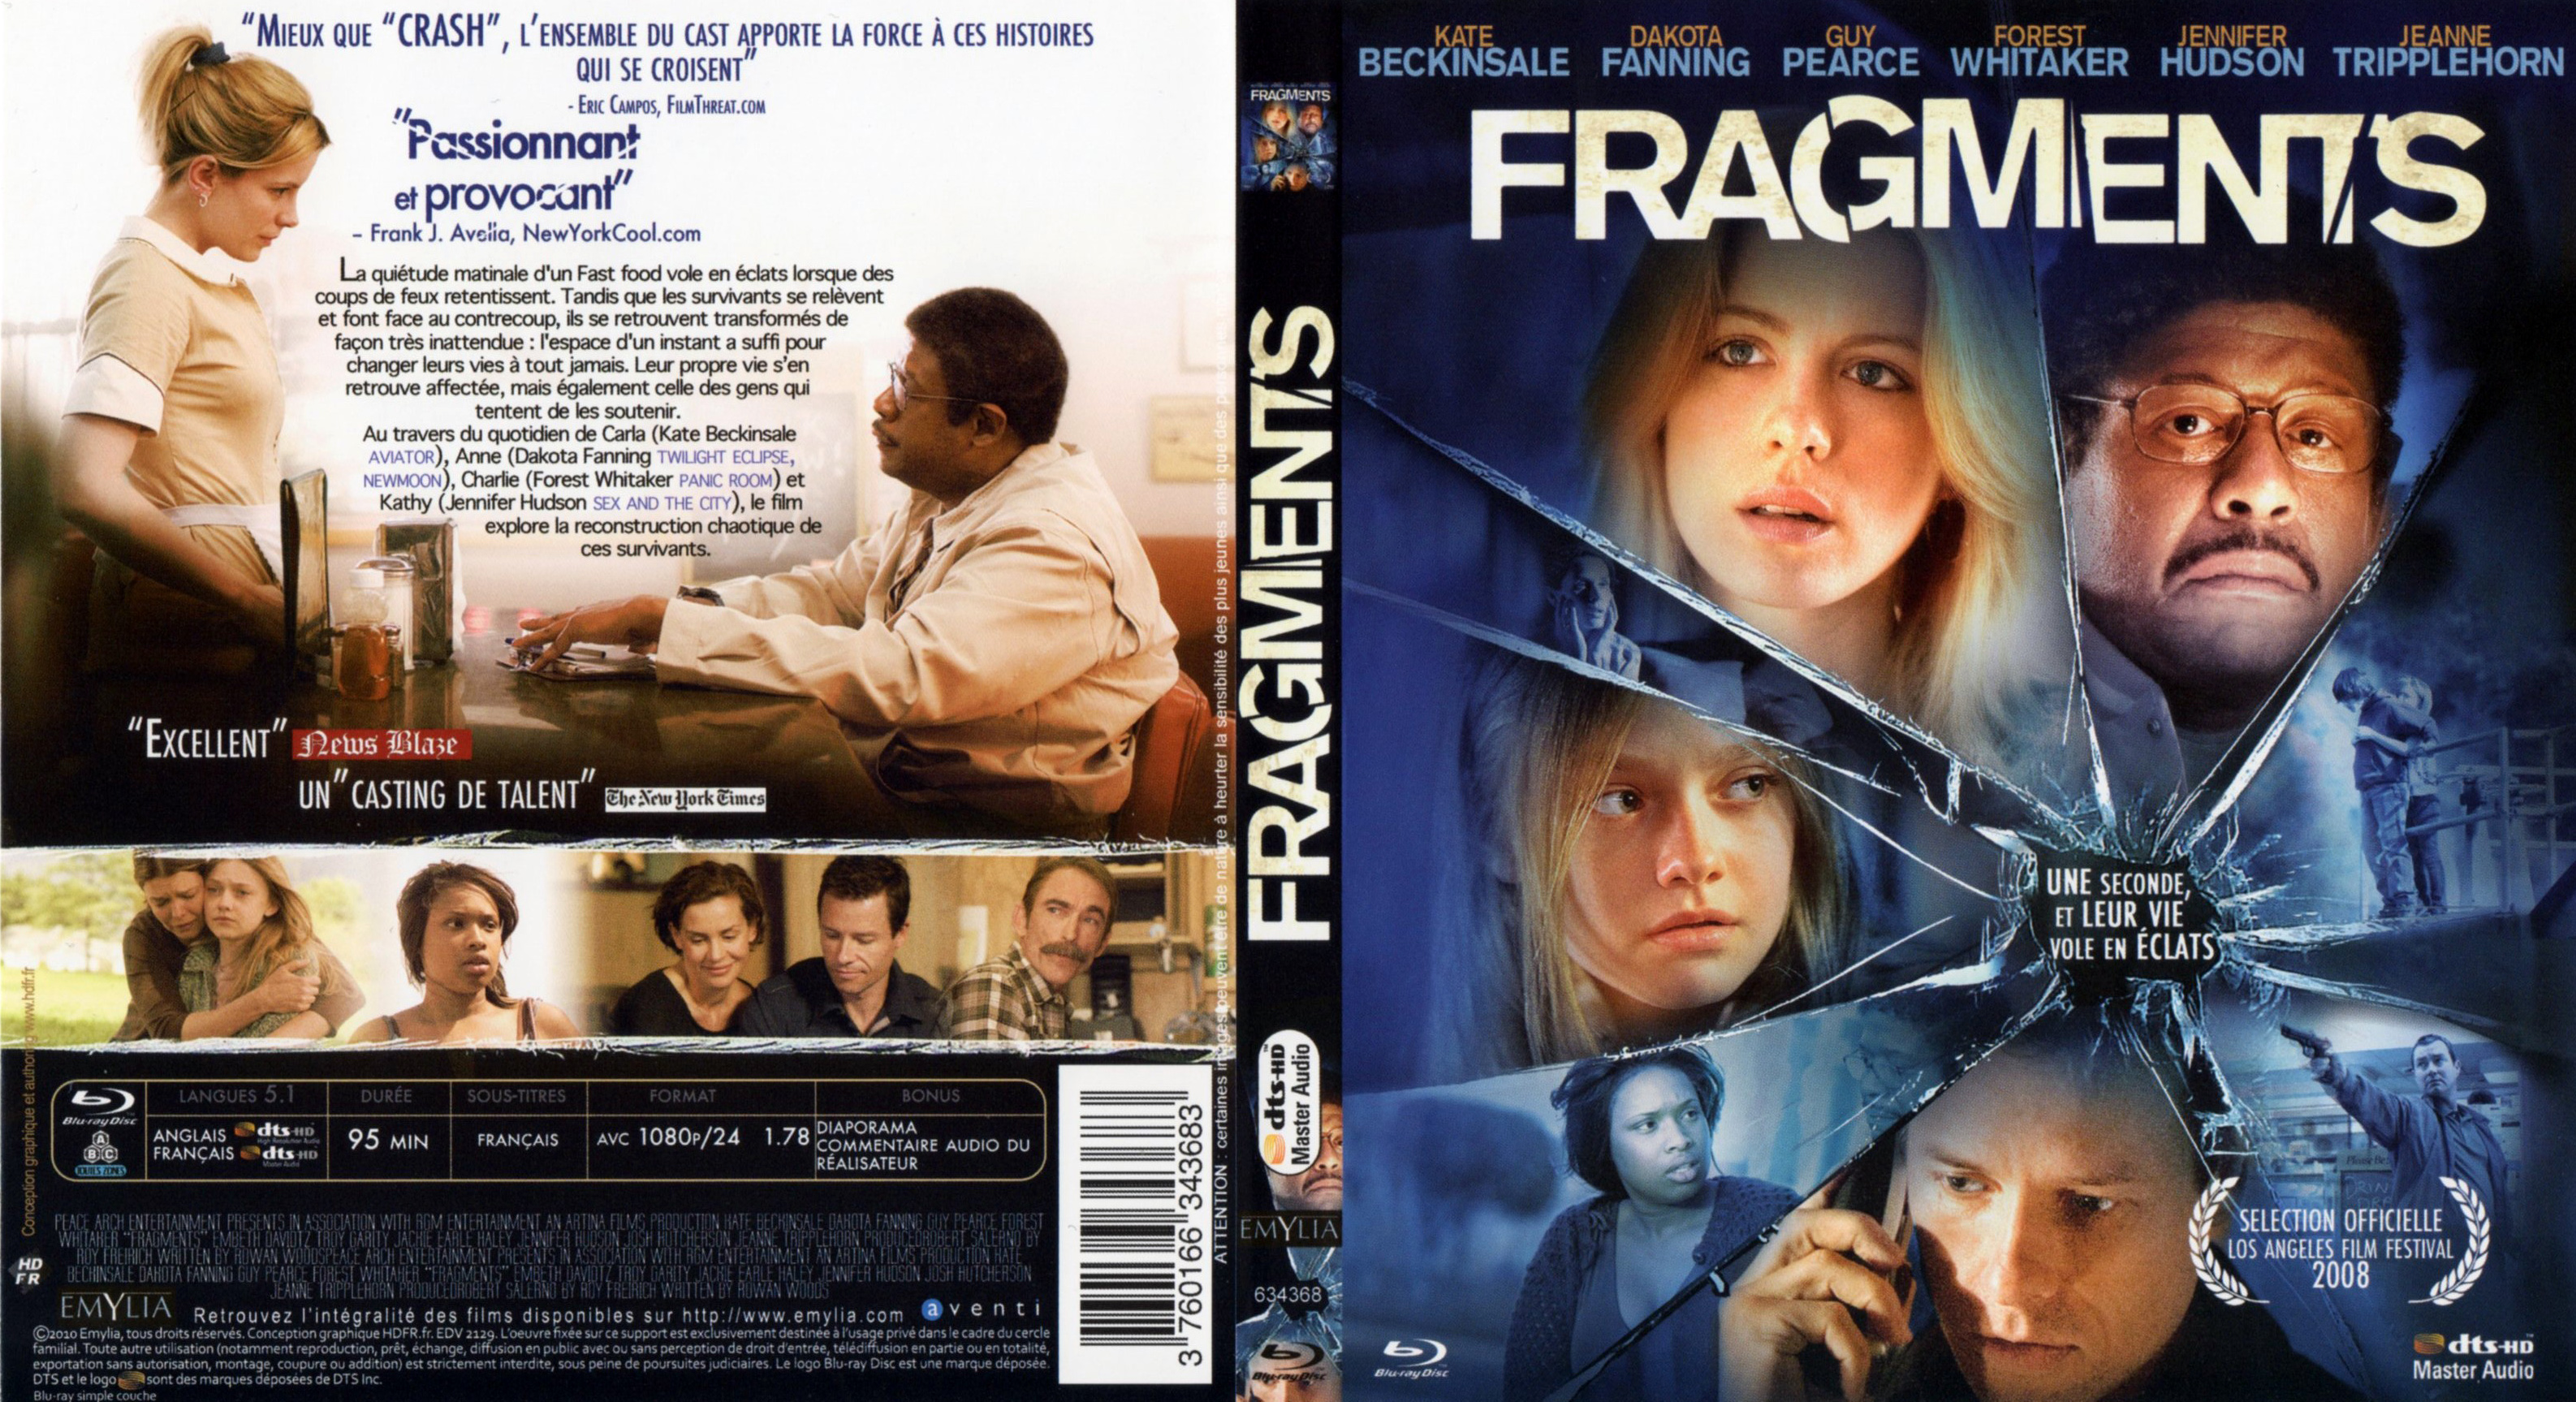 Jaquette DVD Fragments (BLU-RAY)